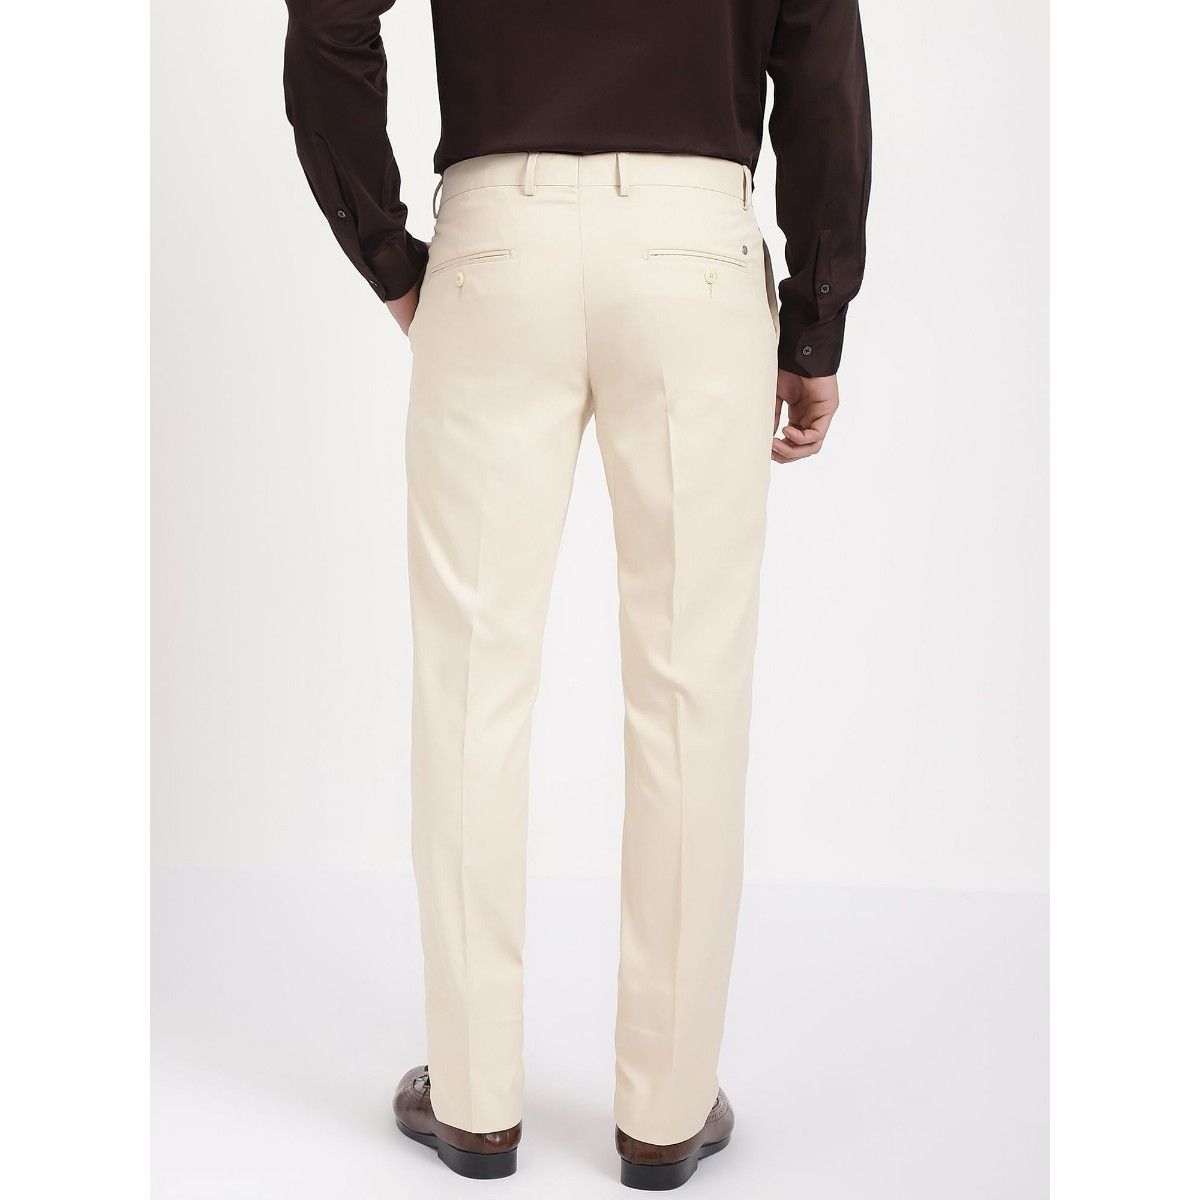 Buy Men's Arrow Green Slim Fit Casual Trousers Online | Centrepoint UAE